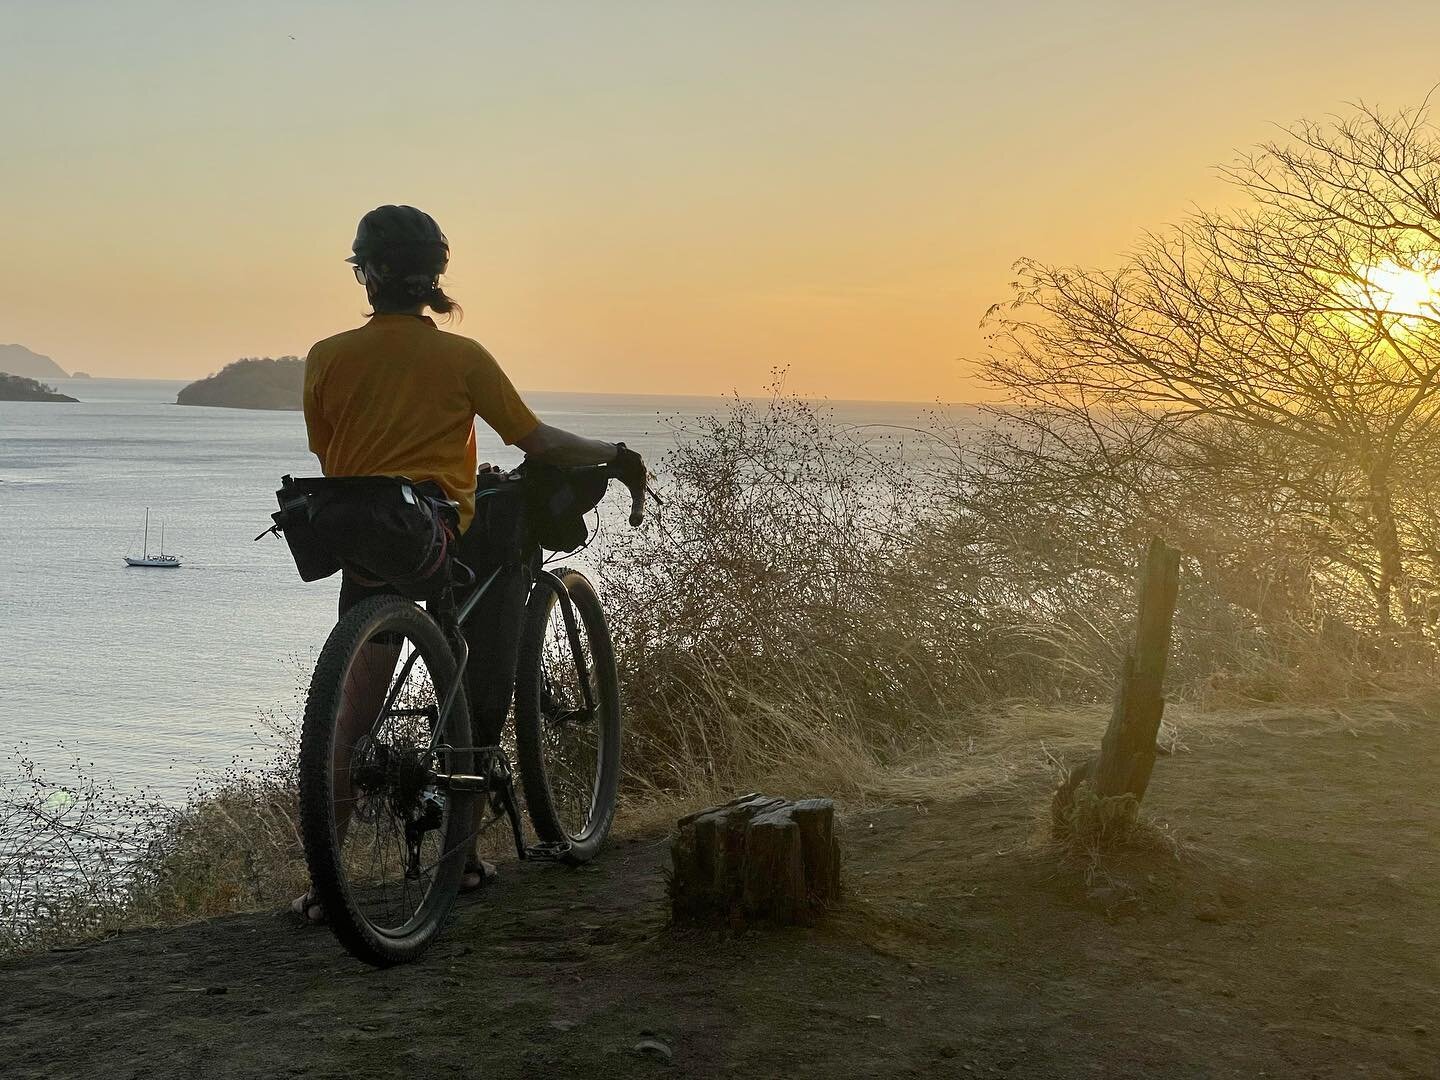 Our motto was &ldquo;slower, further, longer&rdquo; on the west coast of Costa Rica. Every day was a mix of cruiser sand, 20% gravel hills, numerous creek and river crossings, and the occasional single track- all in 90&deg; heat and 80% humidity. Our